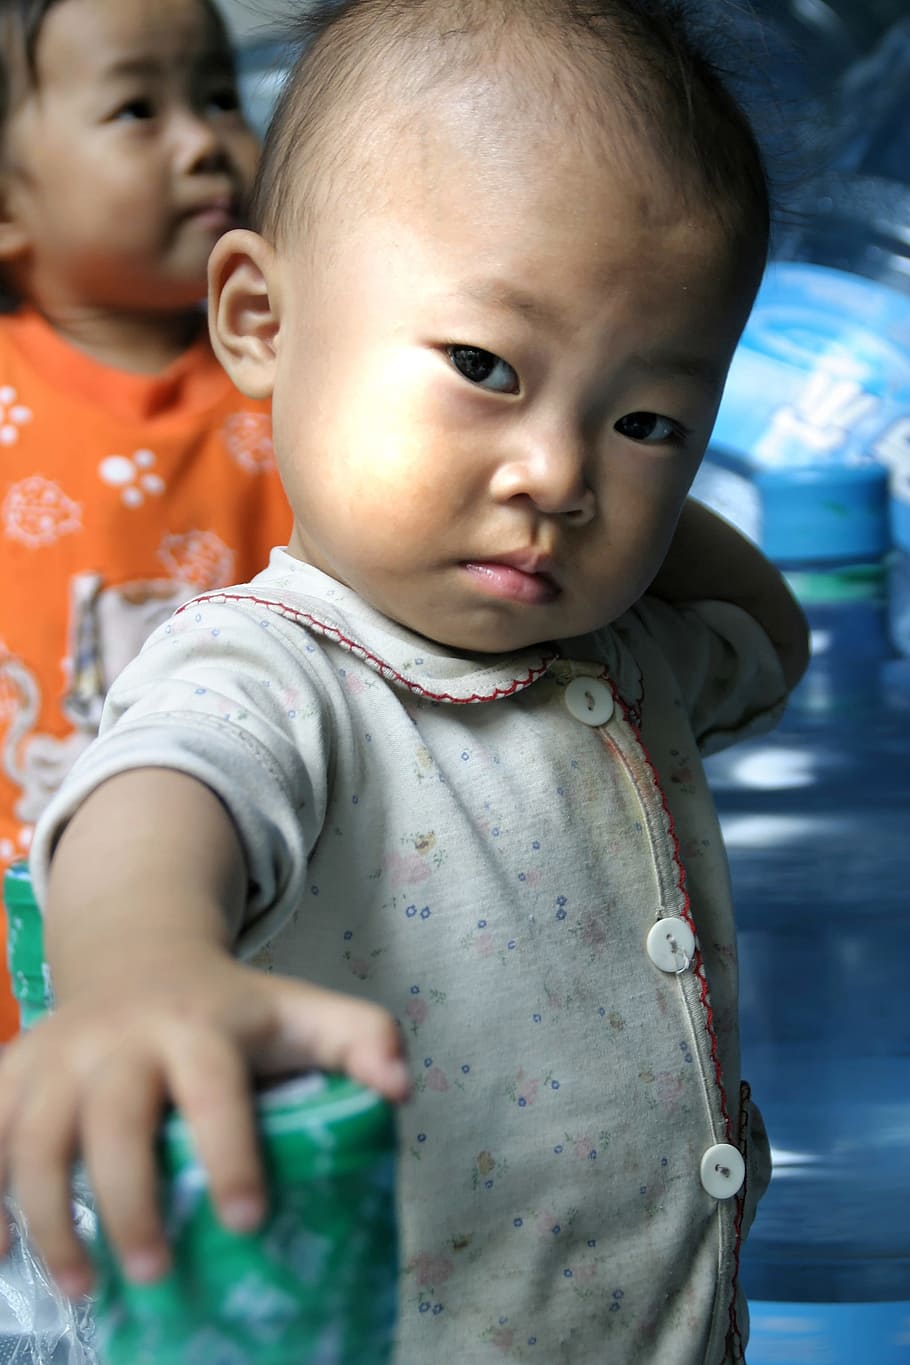 Children, China, Chinese, Asia, baby, babies only, cute, toddler, innocence, childhood